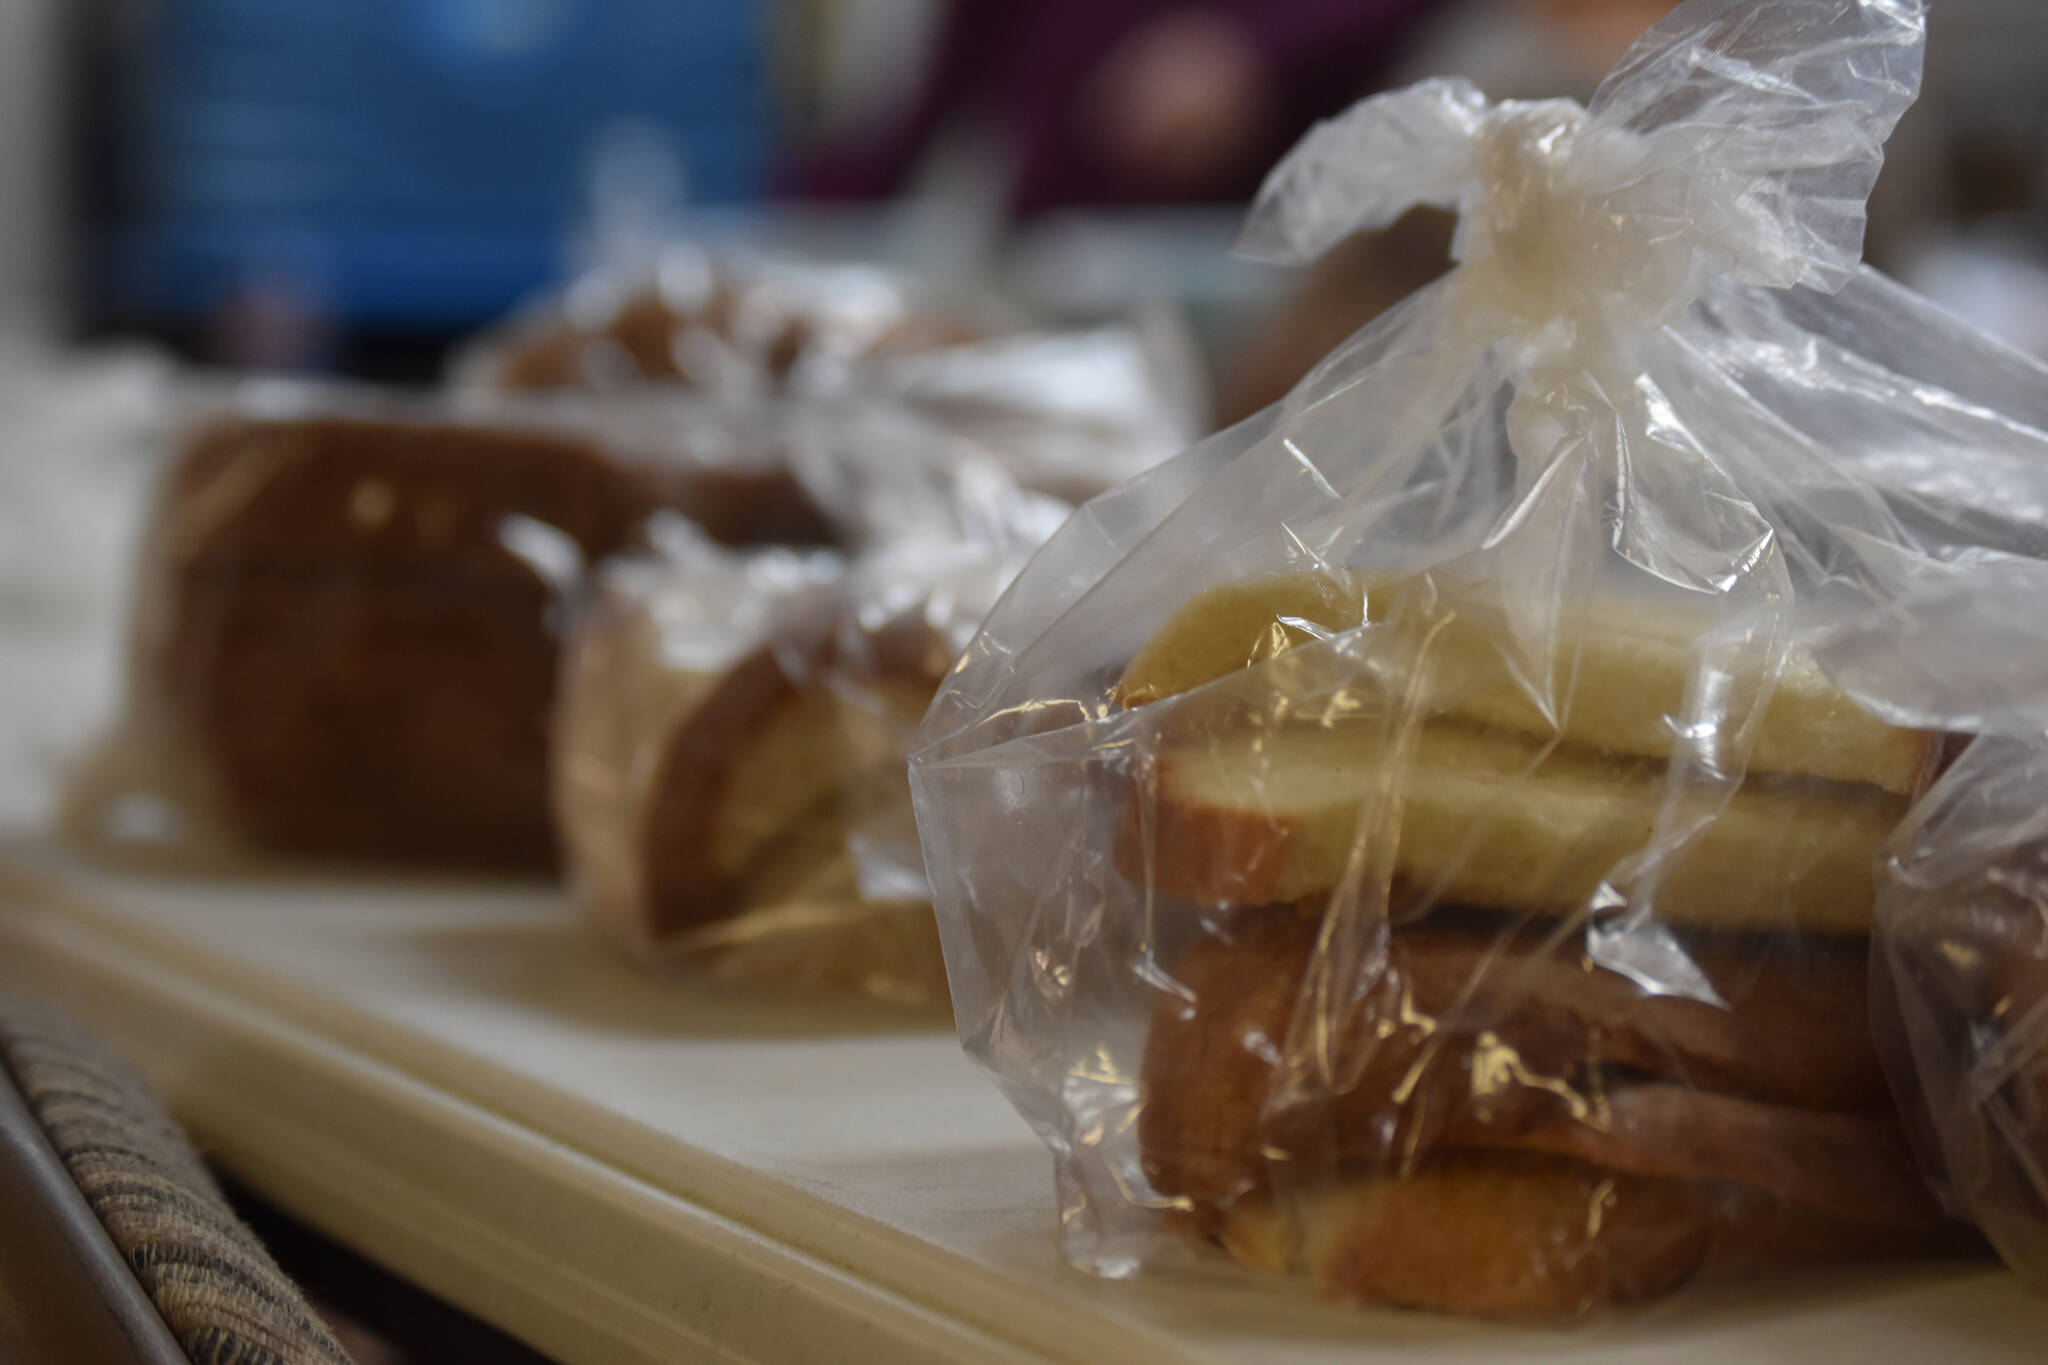 Loaves of bread are available to those in need at Kenai United Methodist Food Pantry in Kenai, Alaska, on Monday, Jan. 23, 2022. (Jake Dye/Peninsula Clarion)